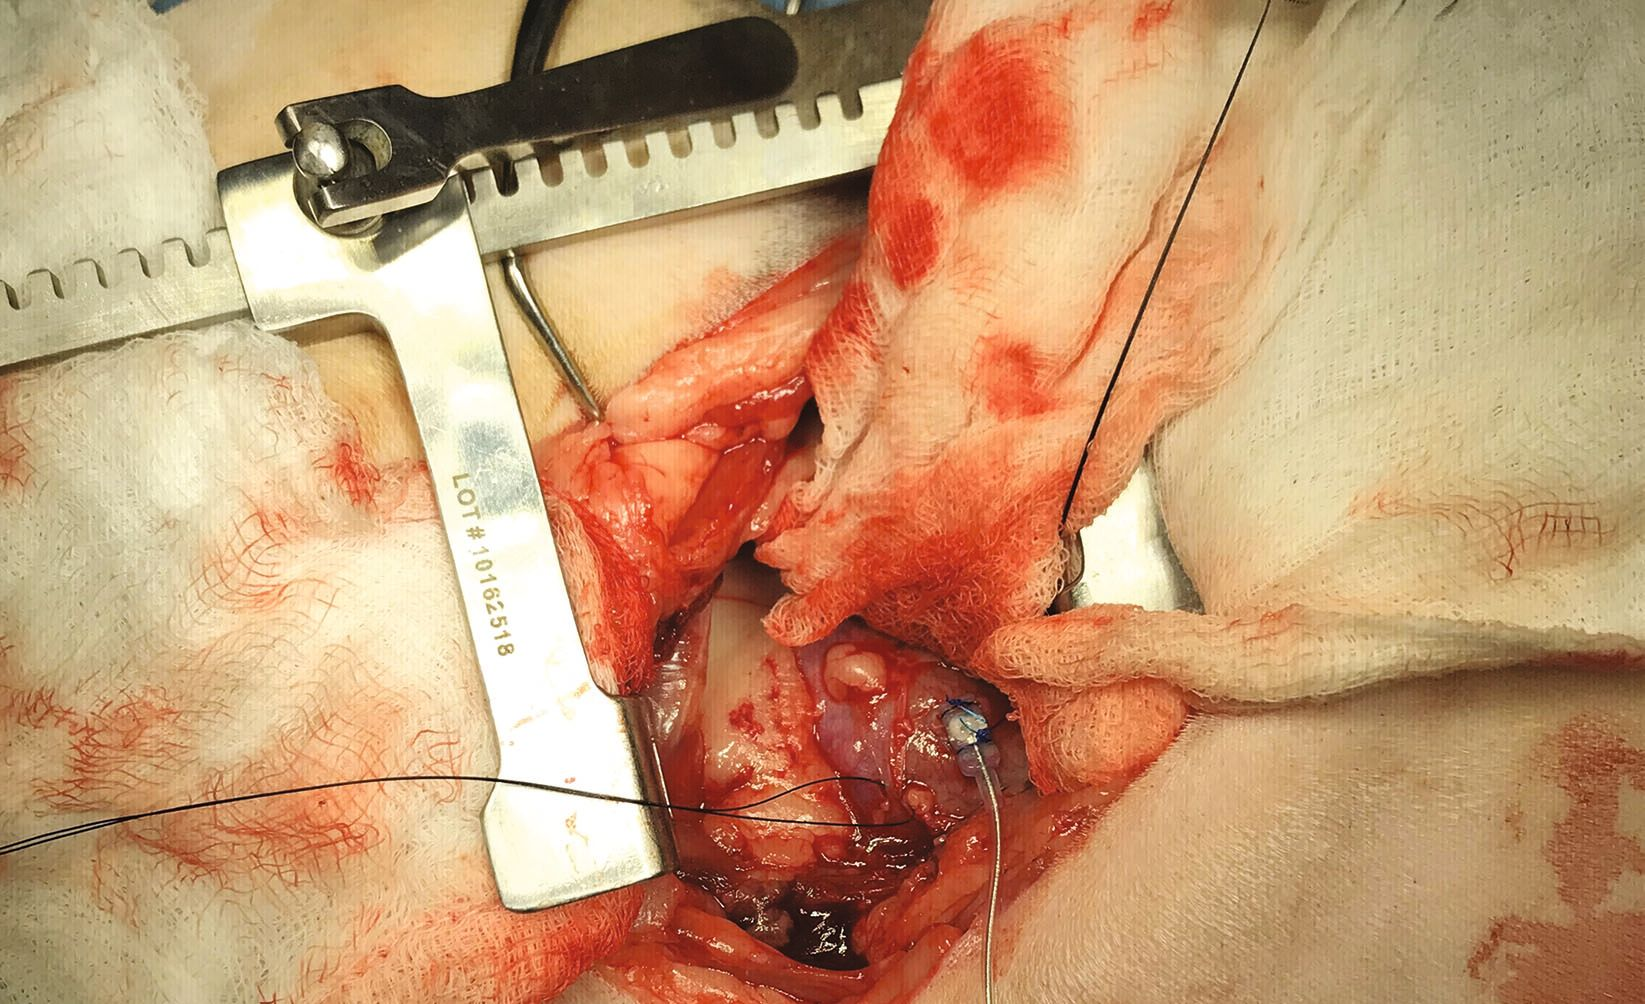 A permanent pacemaker was surgically implanted, with a lead sutured to the left ventricular epicardium